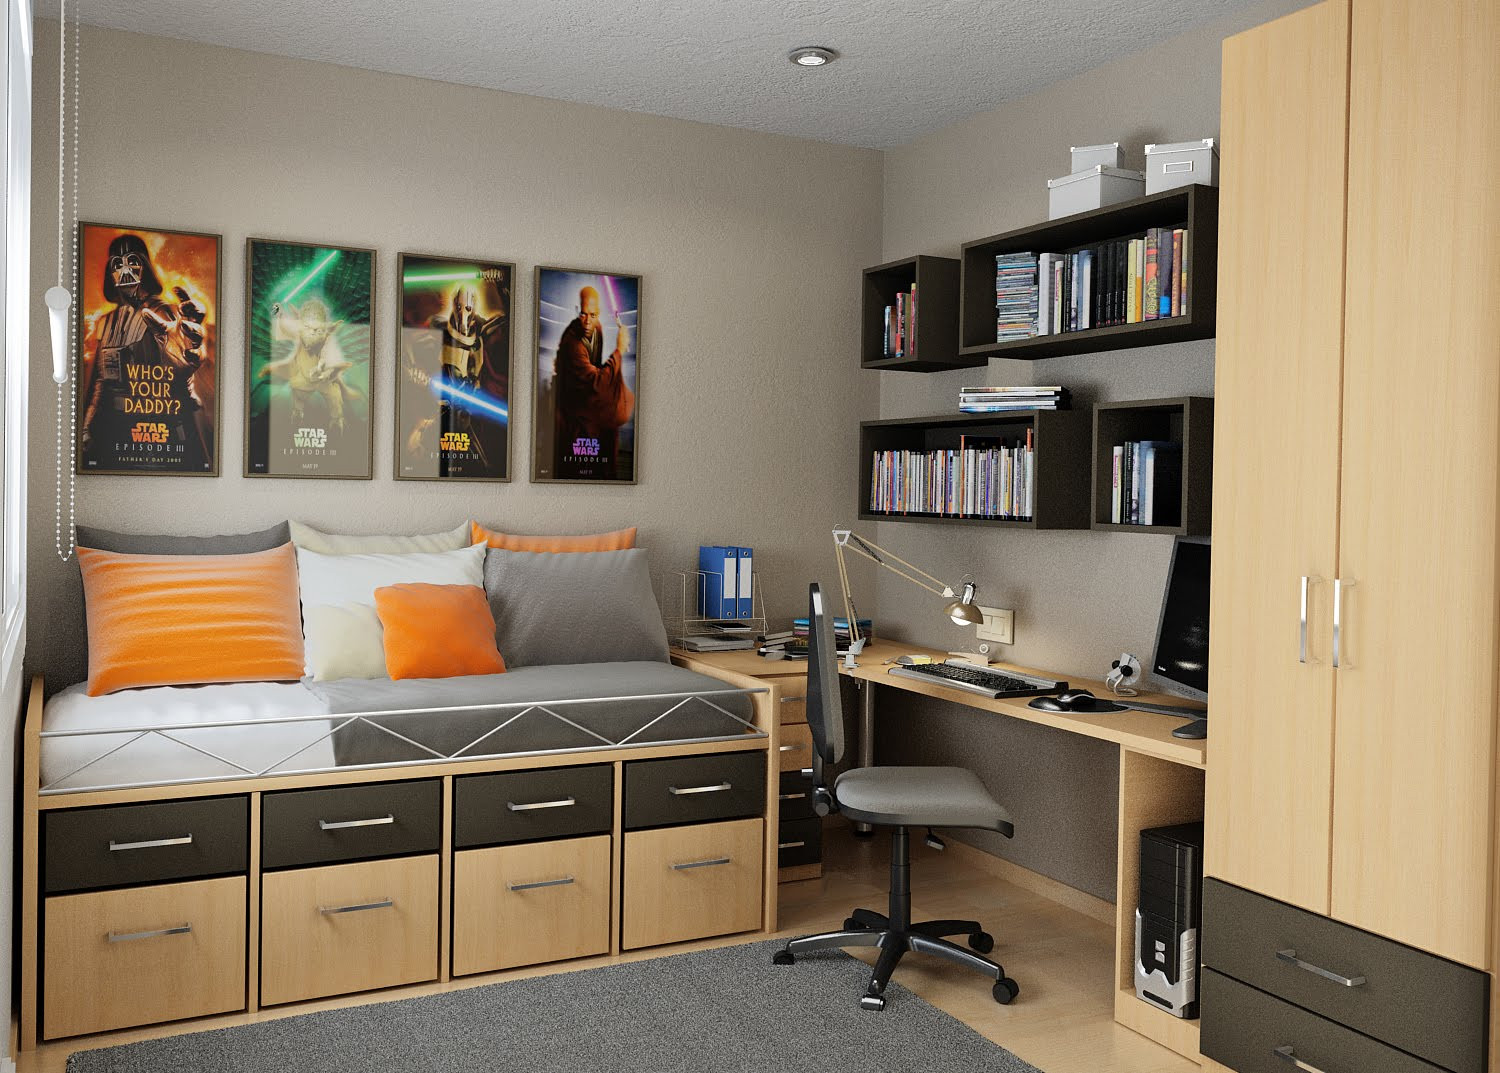 Storage For Bedroom
 Small Bedroom Storage Solutions Designed to Save up Space